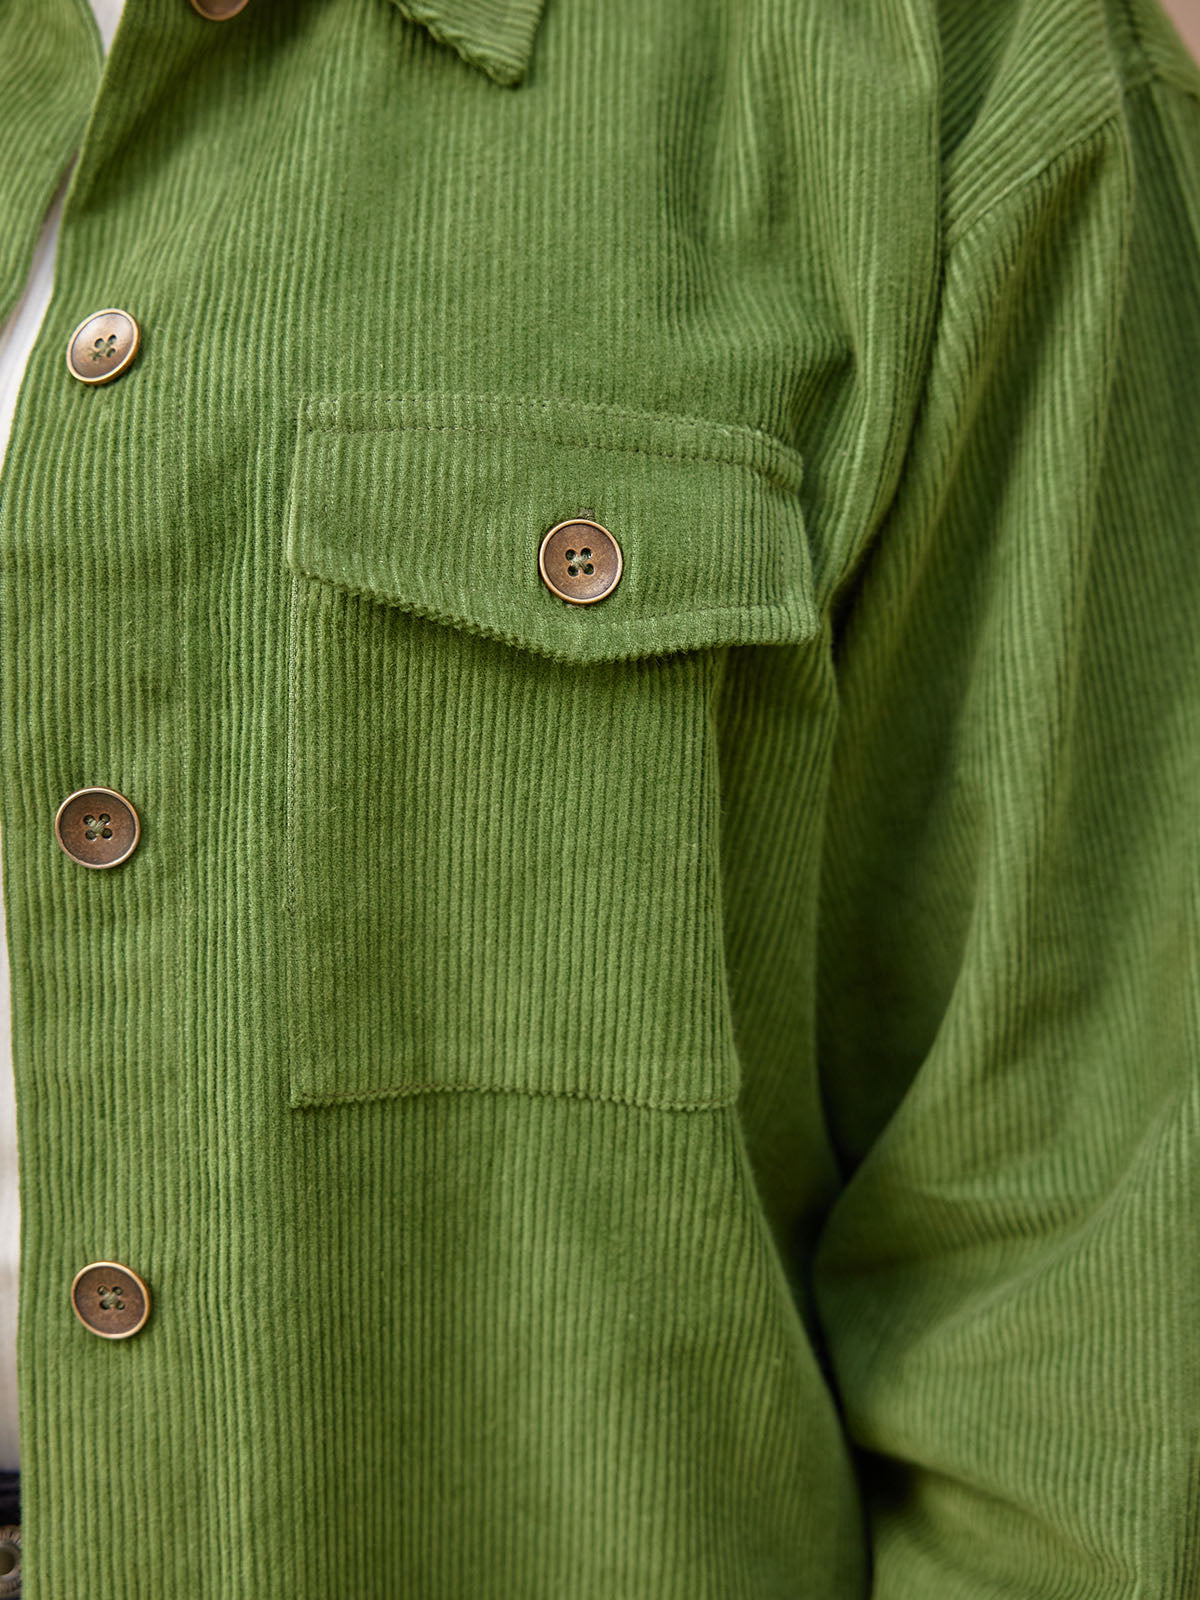 Close up detail of the sustainable Yasmynn shacket in olive, from the front showing the closure buttons and a breast pocket with a flap and one button.